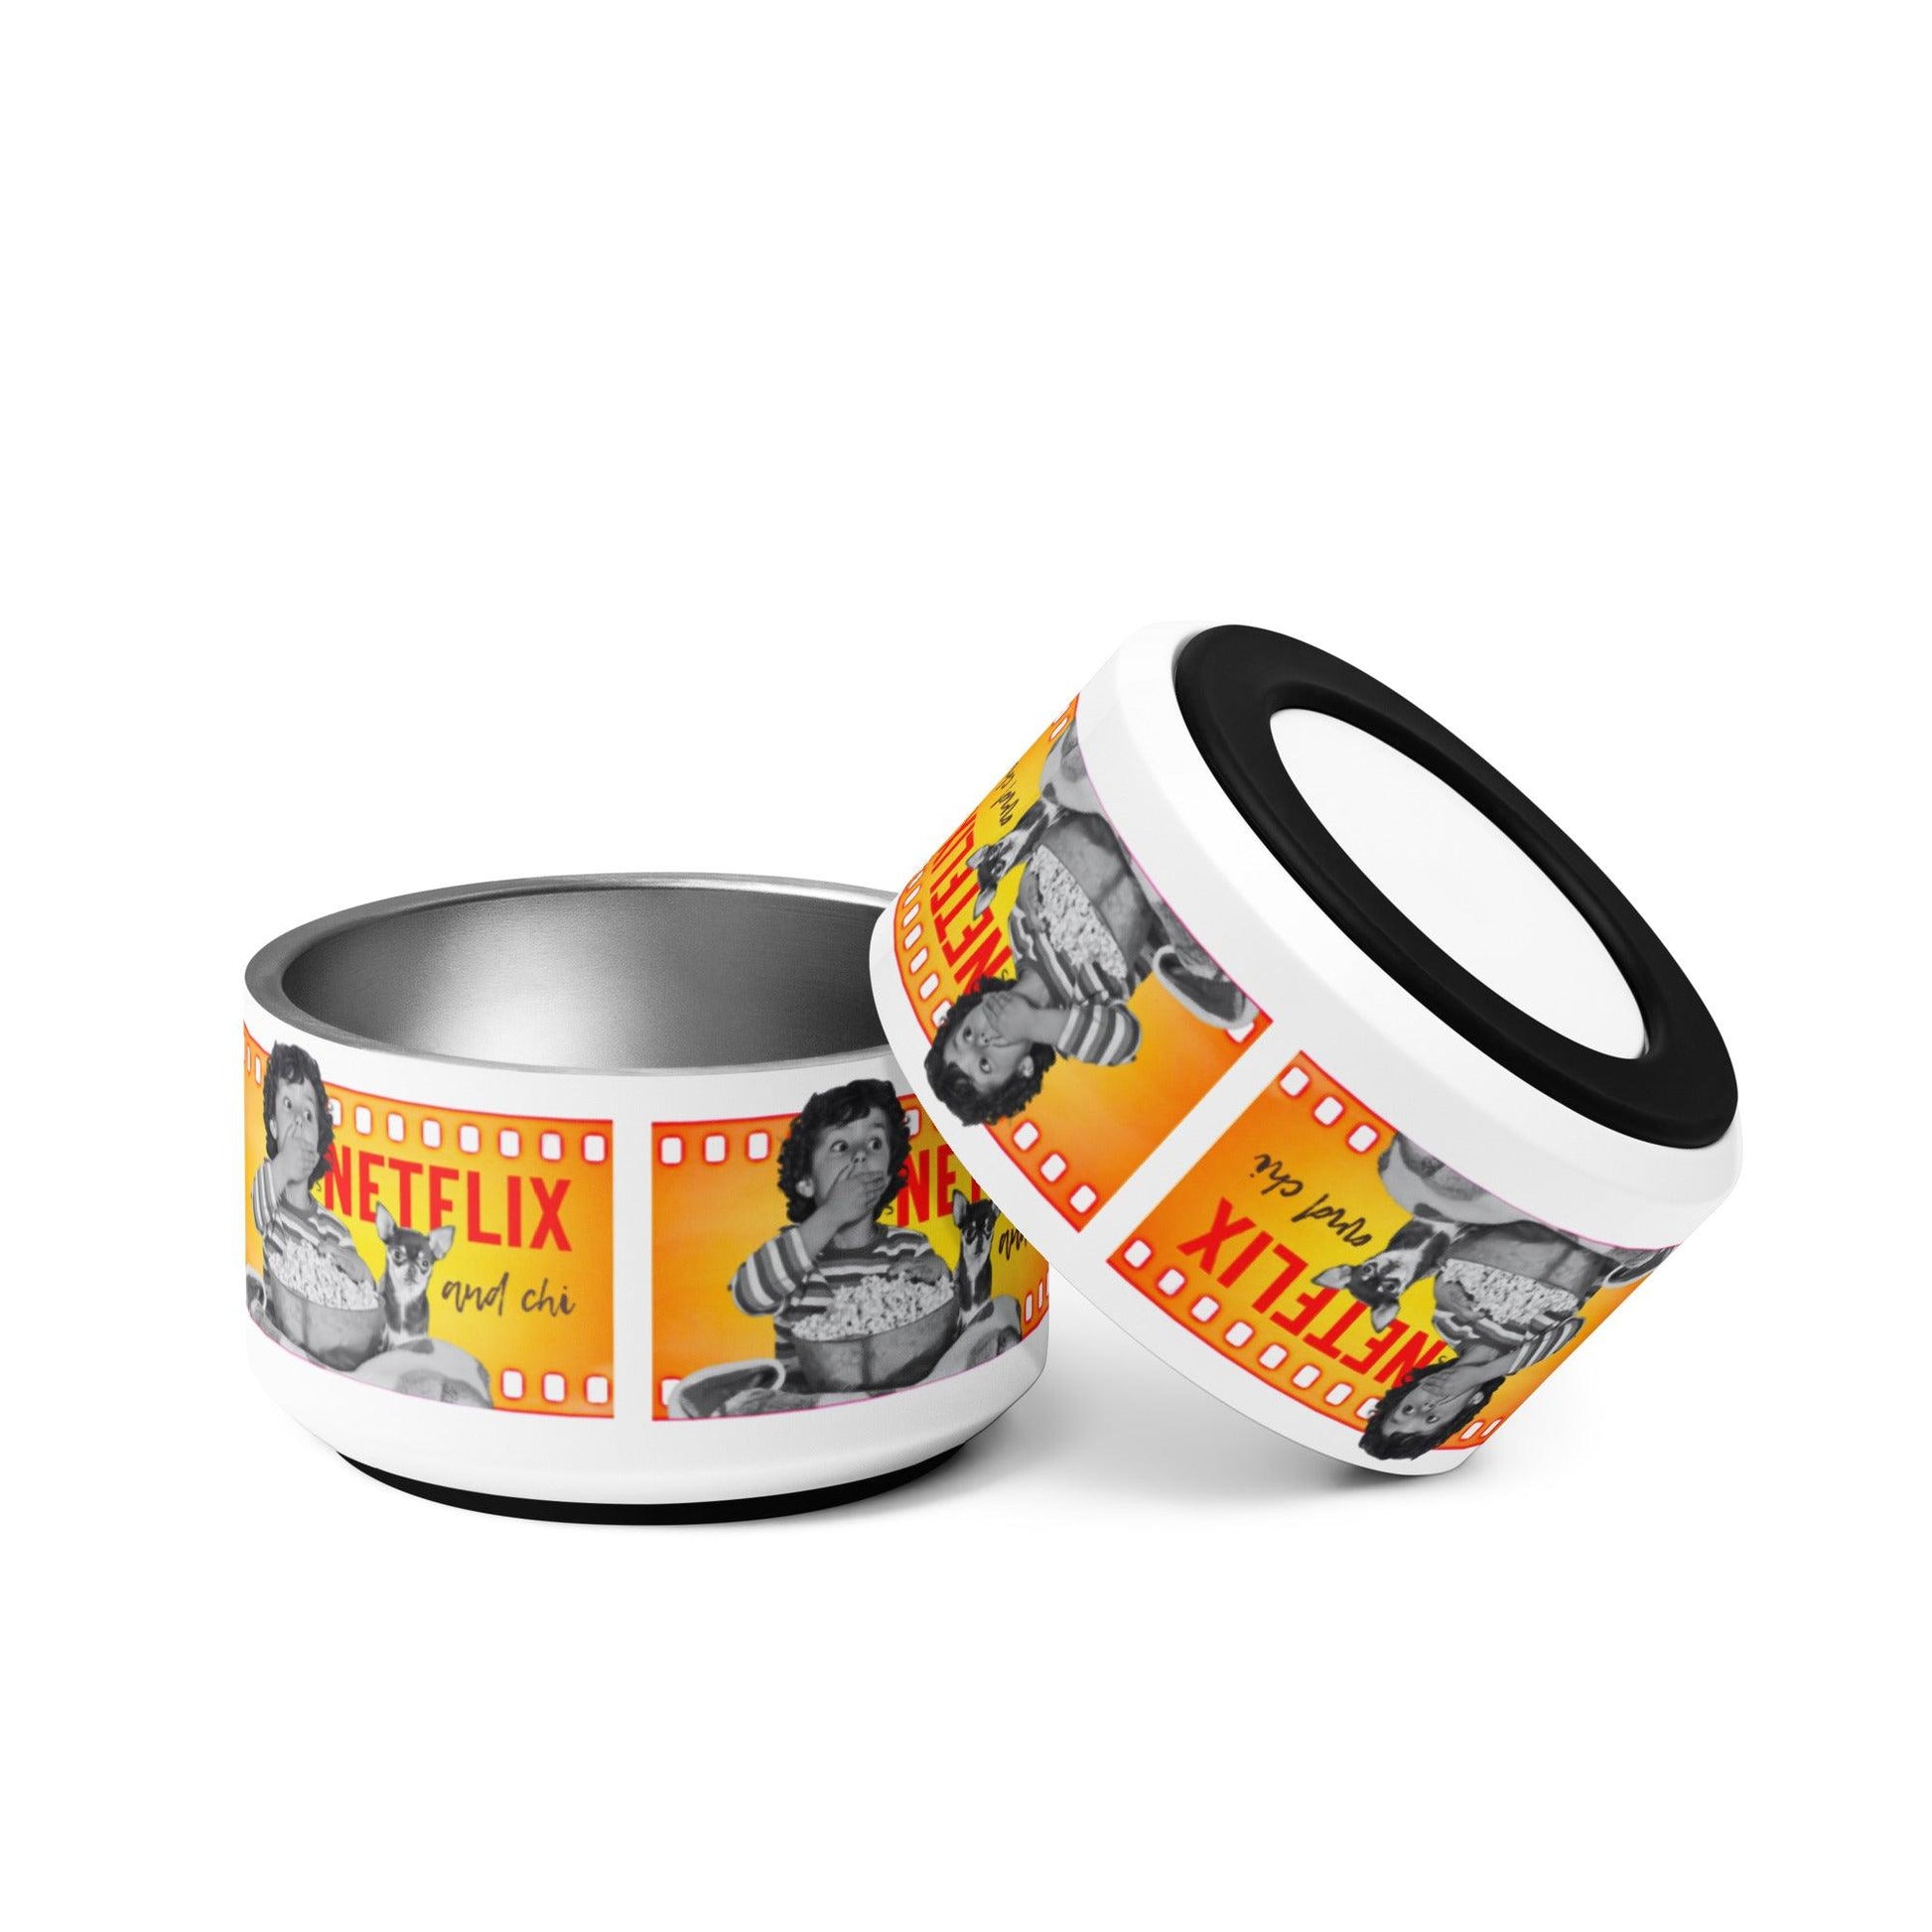 What's better than a Saturday night at home doing Netflix and Chill? Netflix and CHI! If your best Netflix and Chill sofa buddy is a little chihuahua, then they deserve this Netflix and Chi dog bowl. This quality chihuahua food or water bowl features a "film reel" with a boy and his chihuahua pal watching a scary movie together, and the words "Netflix and Chi" against a white background. The stainless steel construction makes for a durable and hygienic dog bowl, and it has a removable anti-slip rubber base.